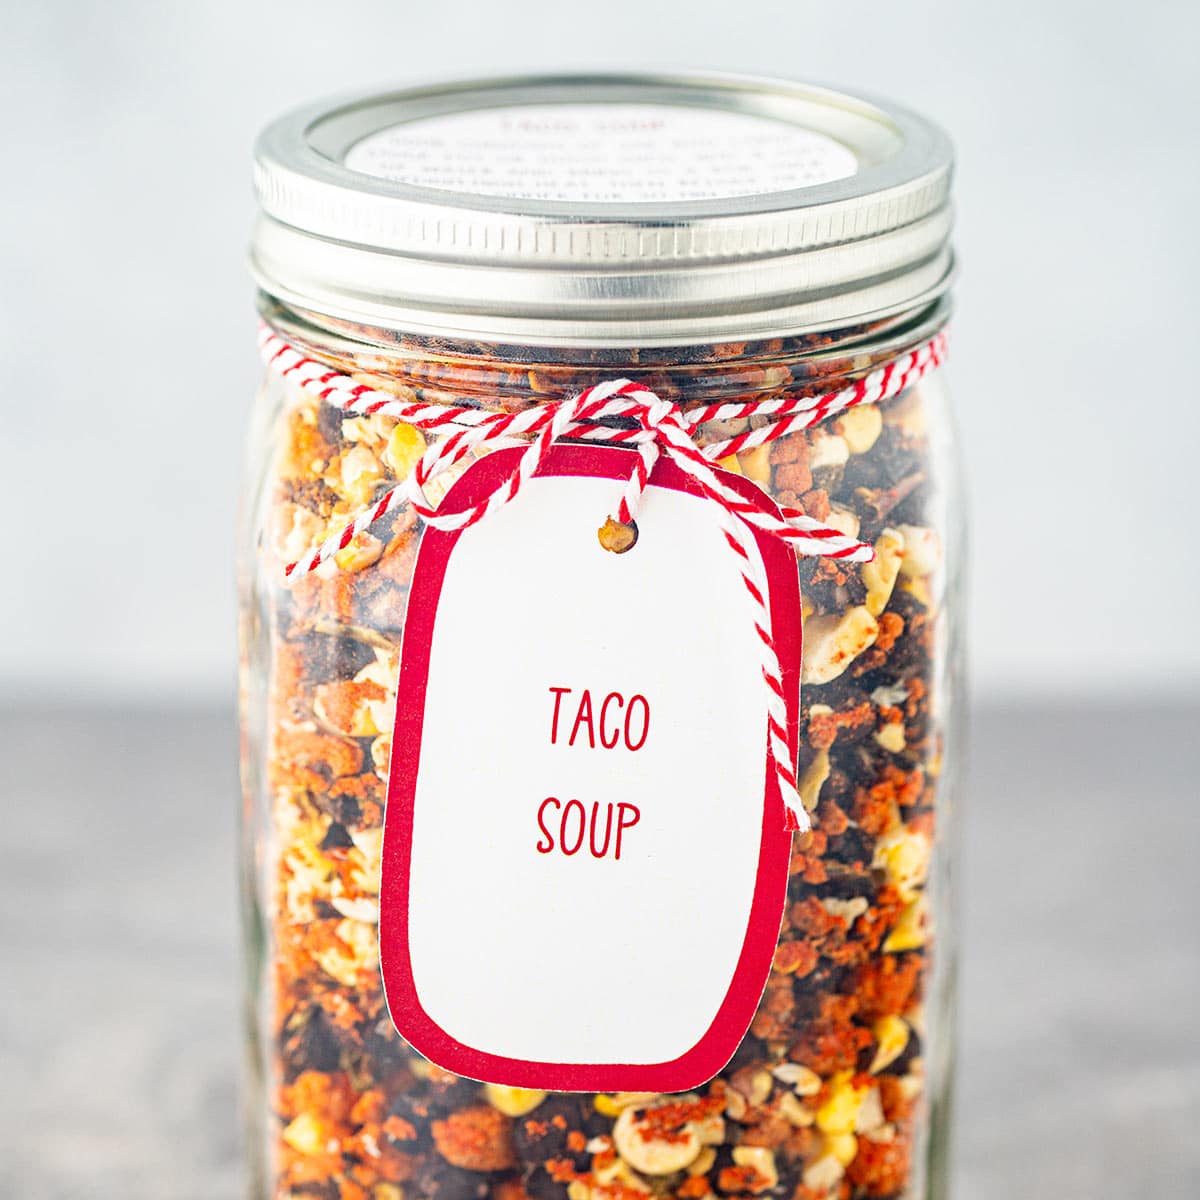 Tex Mex Vegetable soup mix in a jar a great gift idea